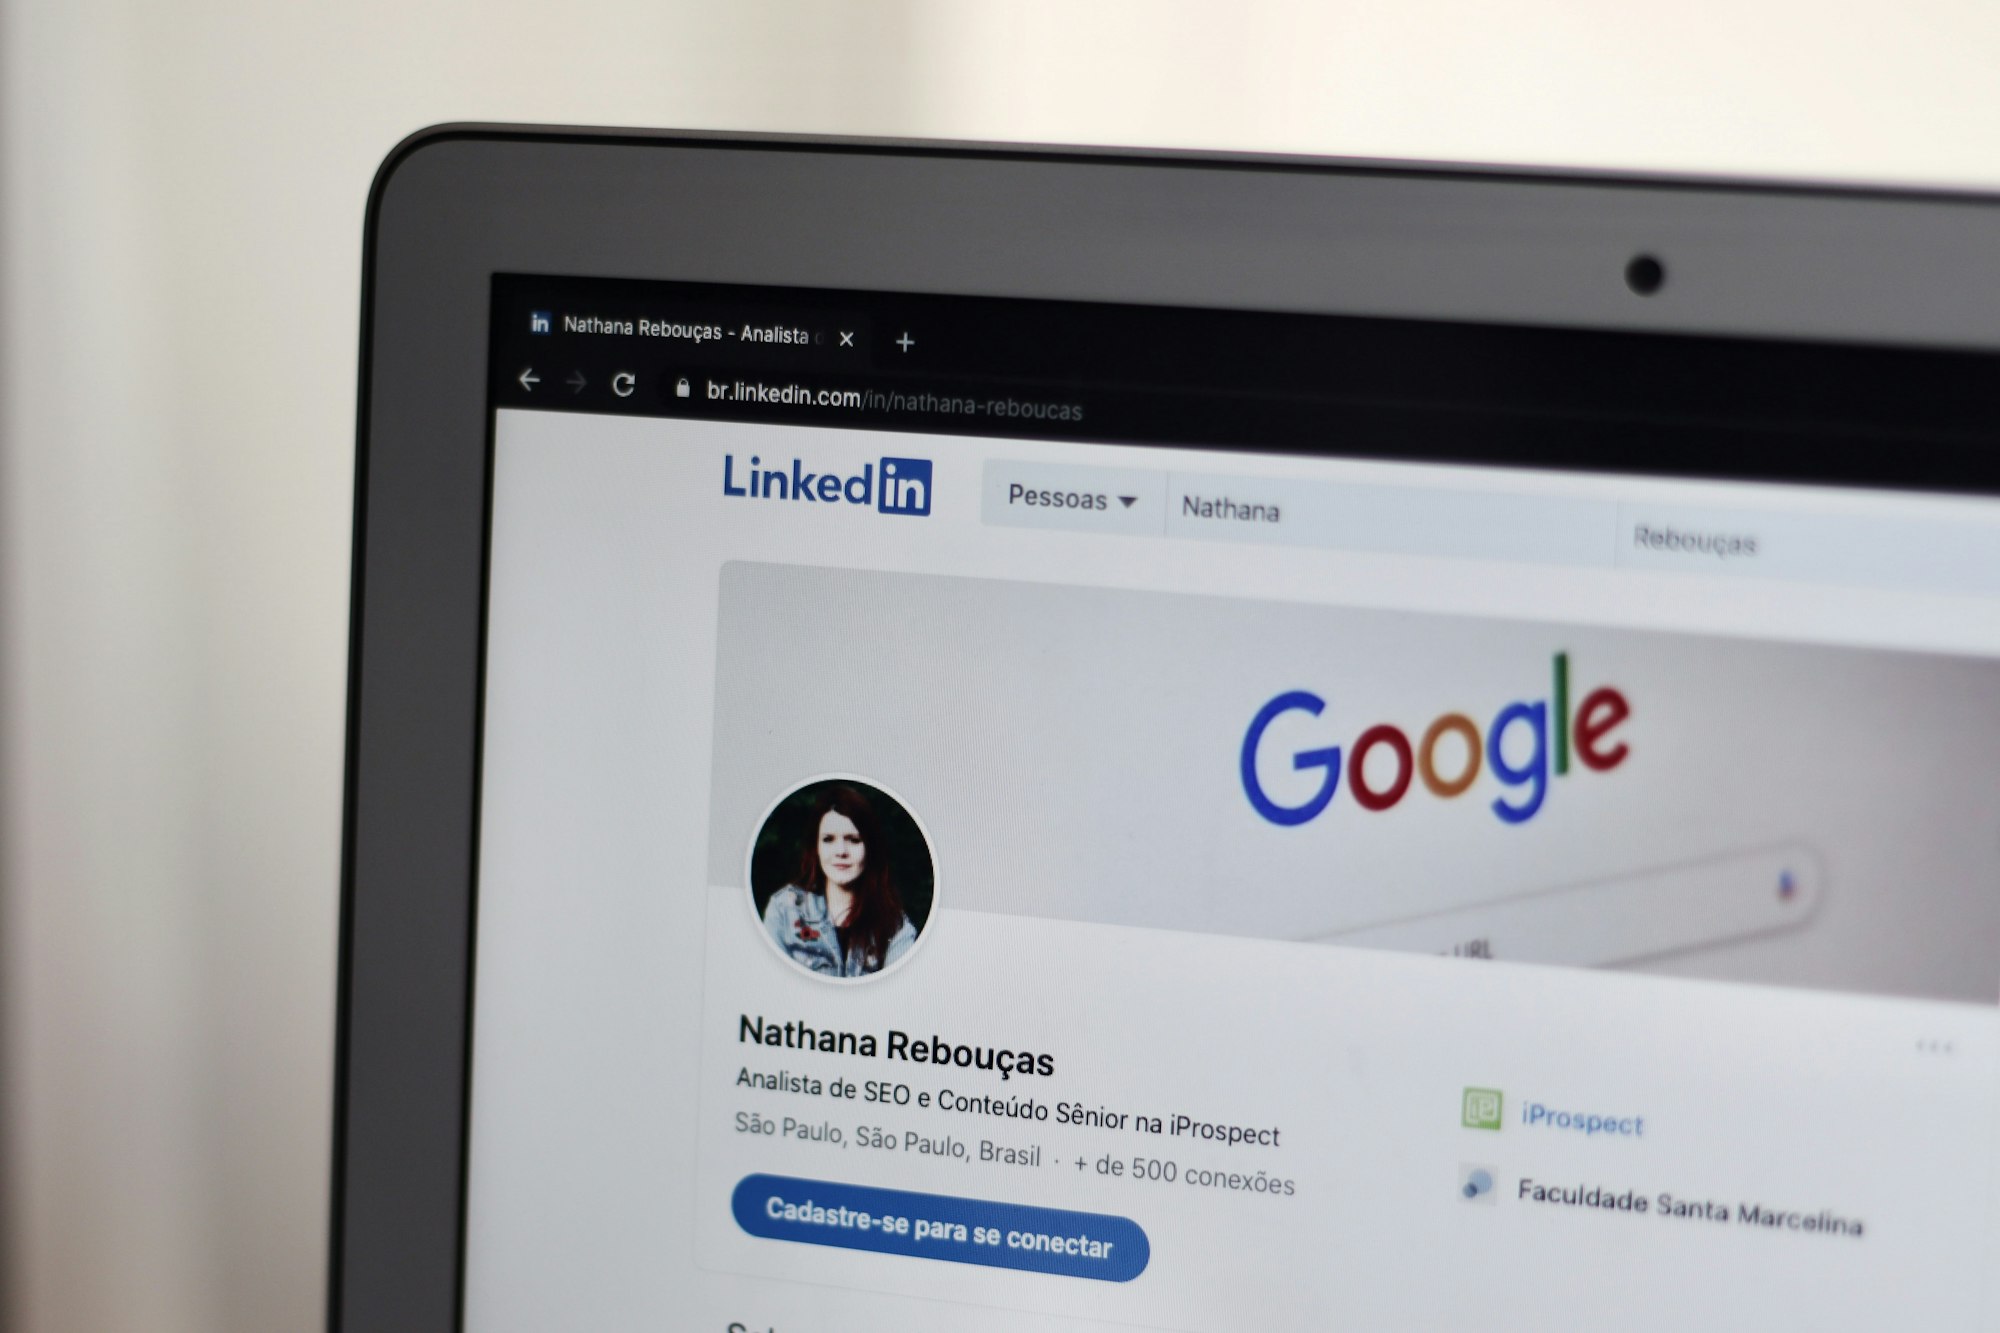 How to Change Your LinkedIn Profile URL